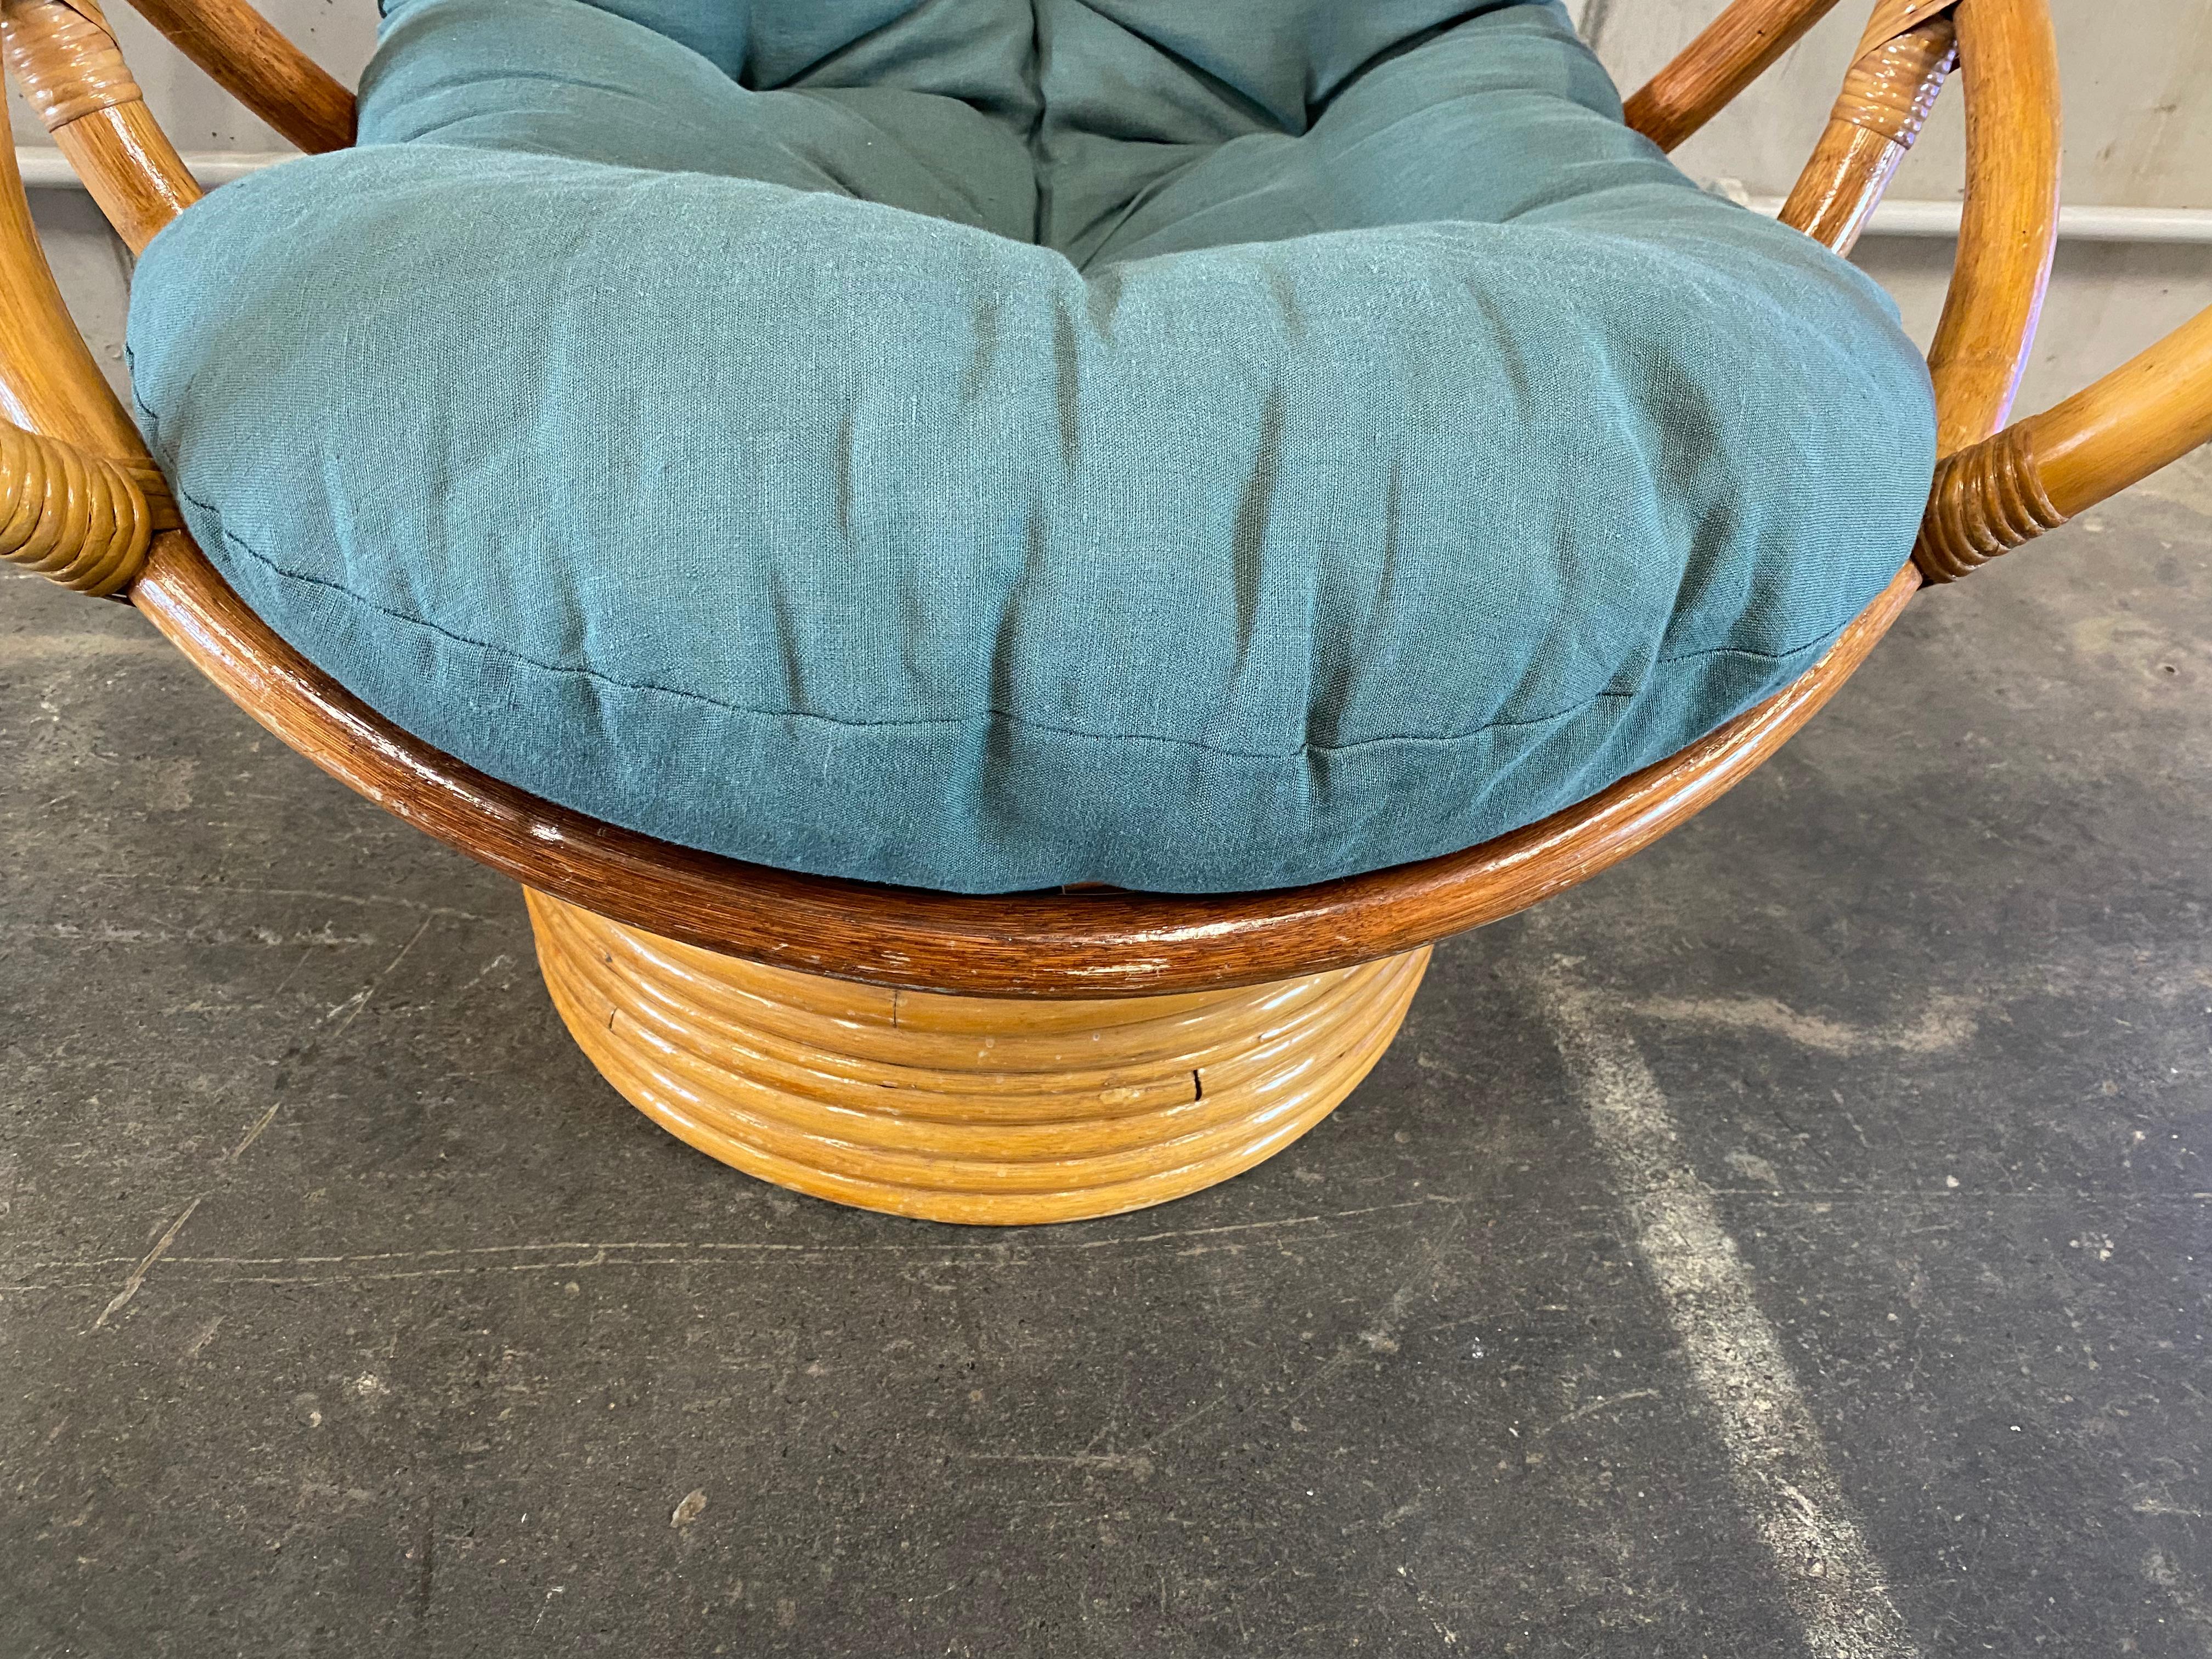 Boho Style Upholstered Wicker Rattan Armchair, 1970s For Sale 2